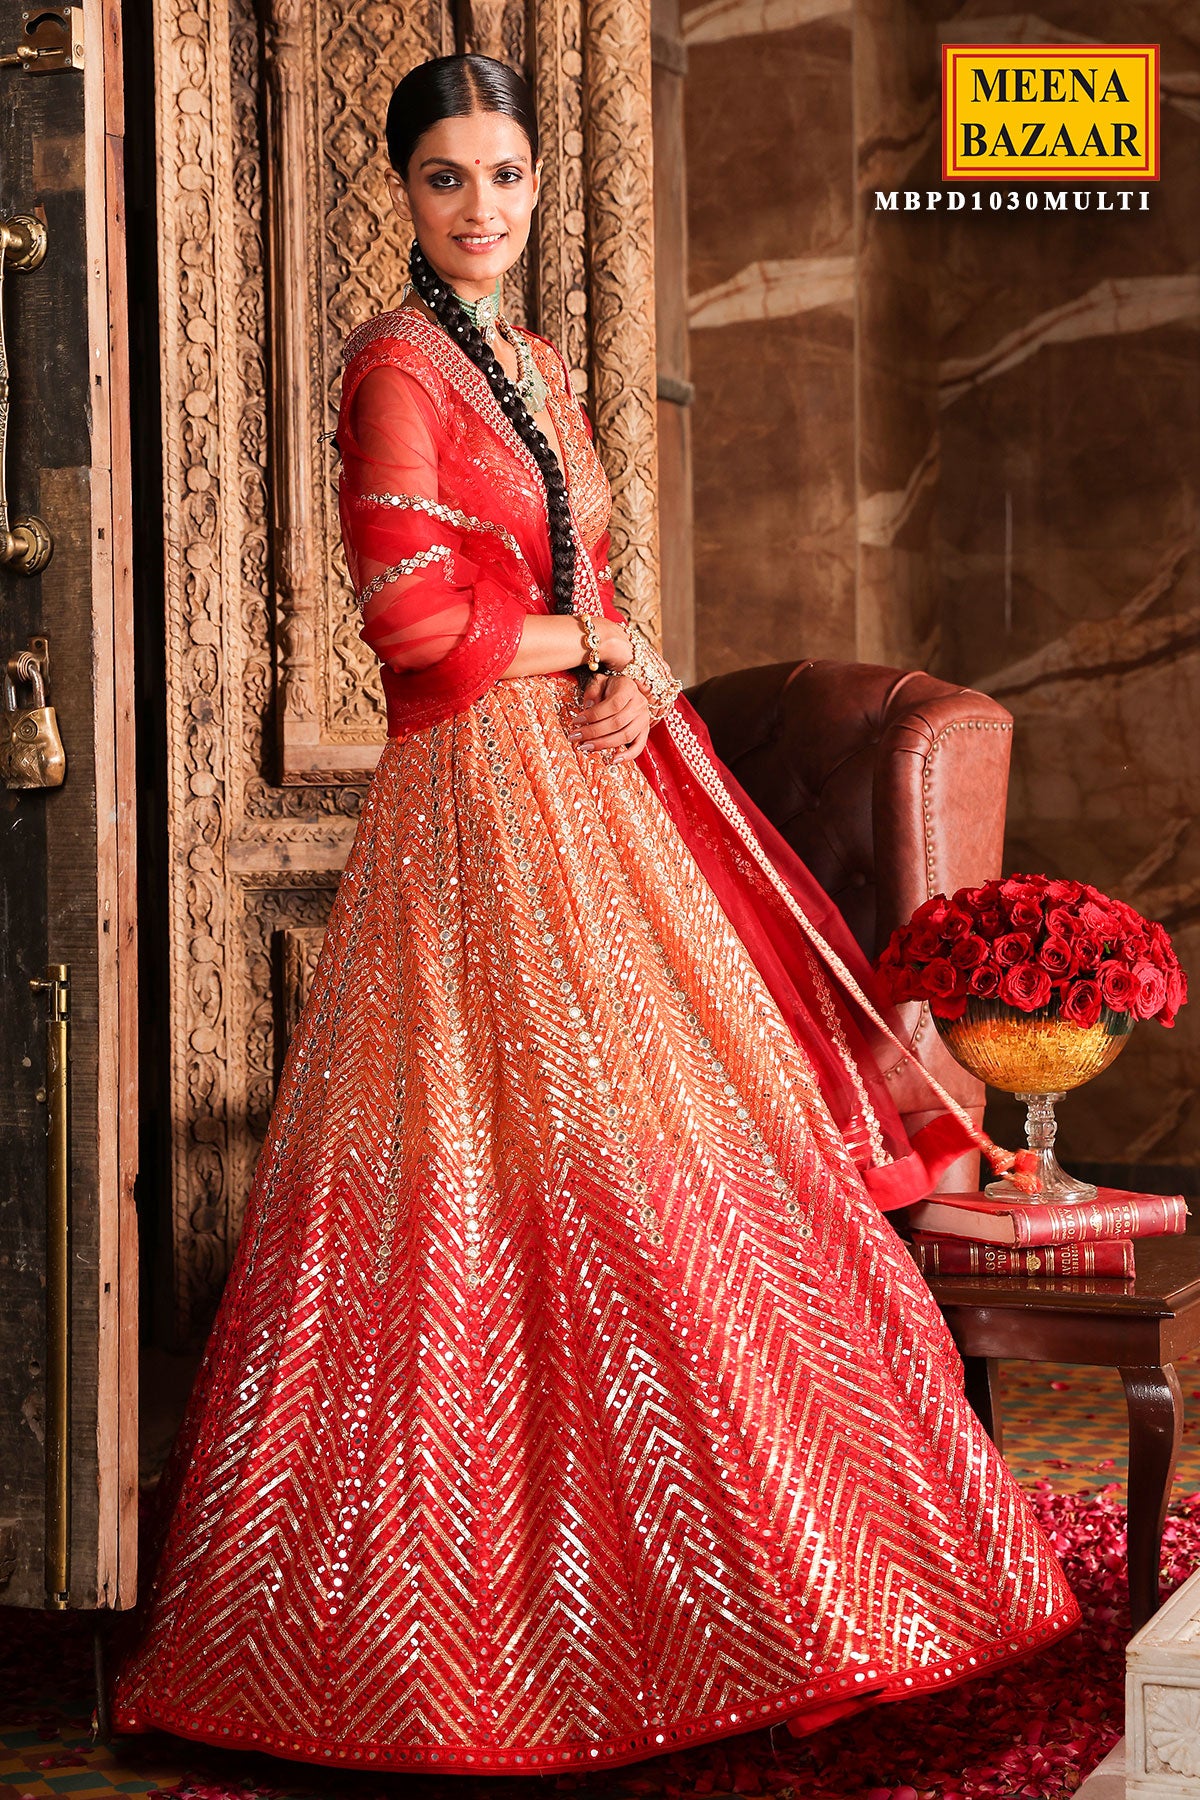 ShaadiKiTyaari Our Velvet Bridal Lehenga with two dupattas, is the perfect  choice for your special wedding entrance! Shop now at www.mb... | Instagram